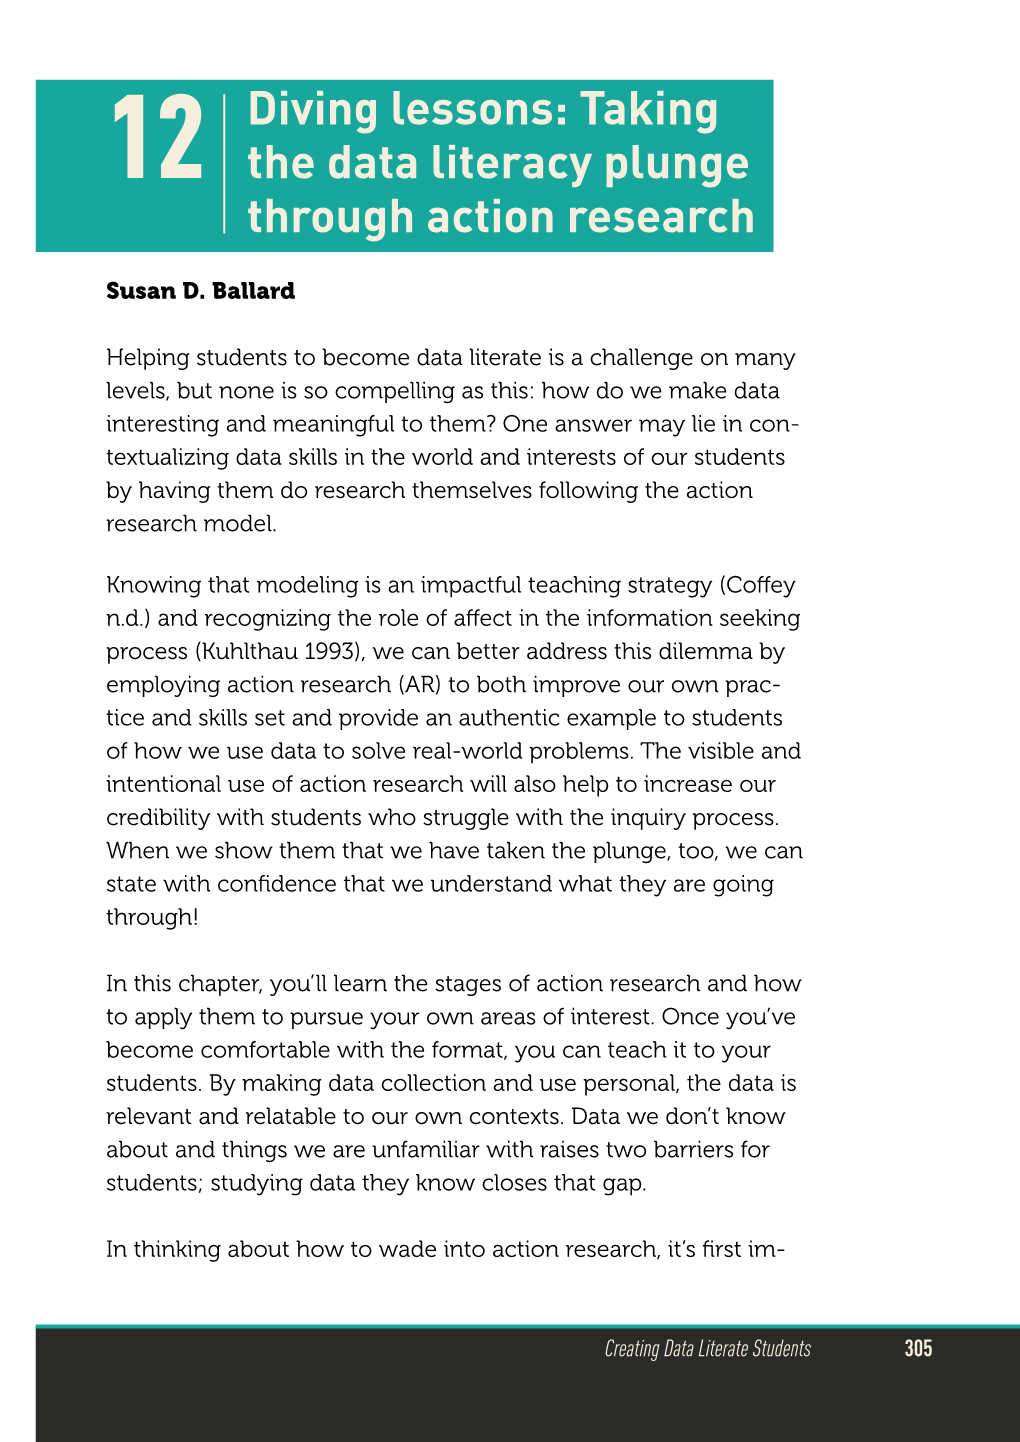 Taking the Data Literacy Plunge Through Action Research